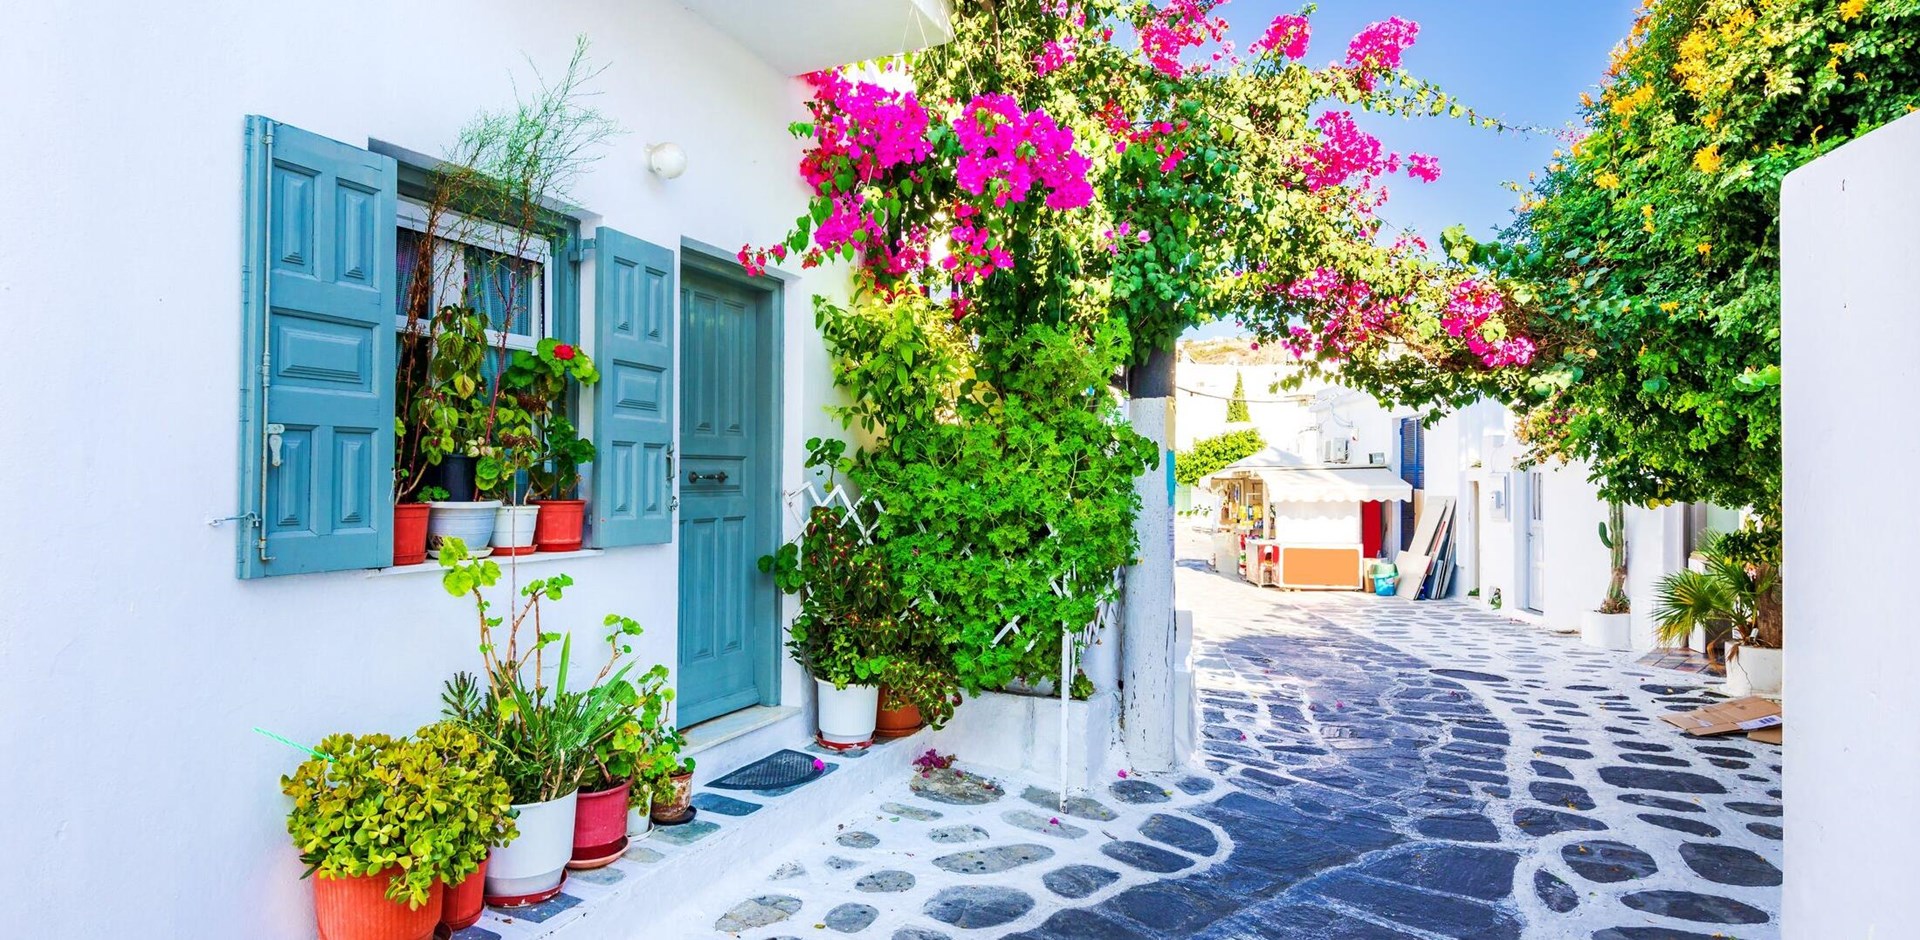 Mykonos, Greece. Whitewashed dotted alley in old city Little Venice, Cyclades Greek Islands.